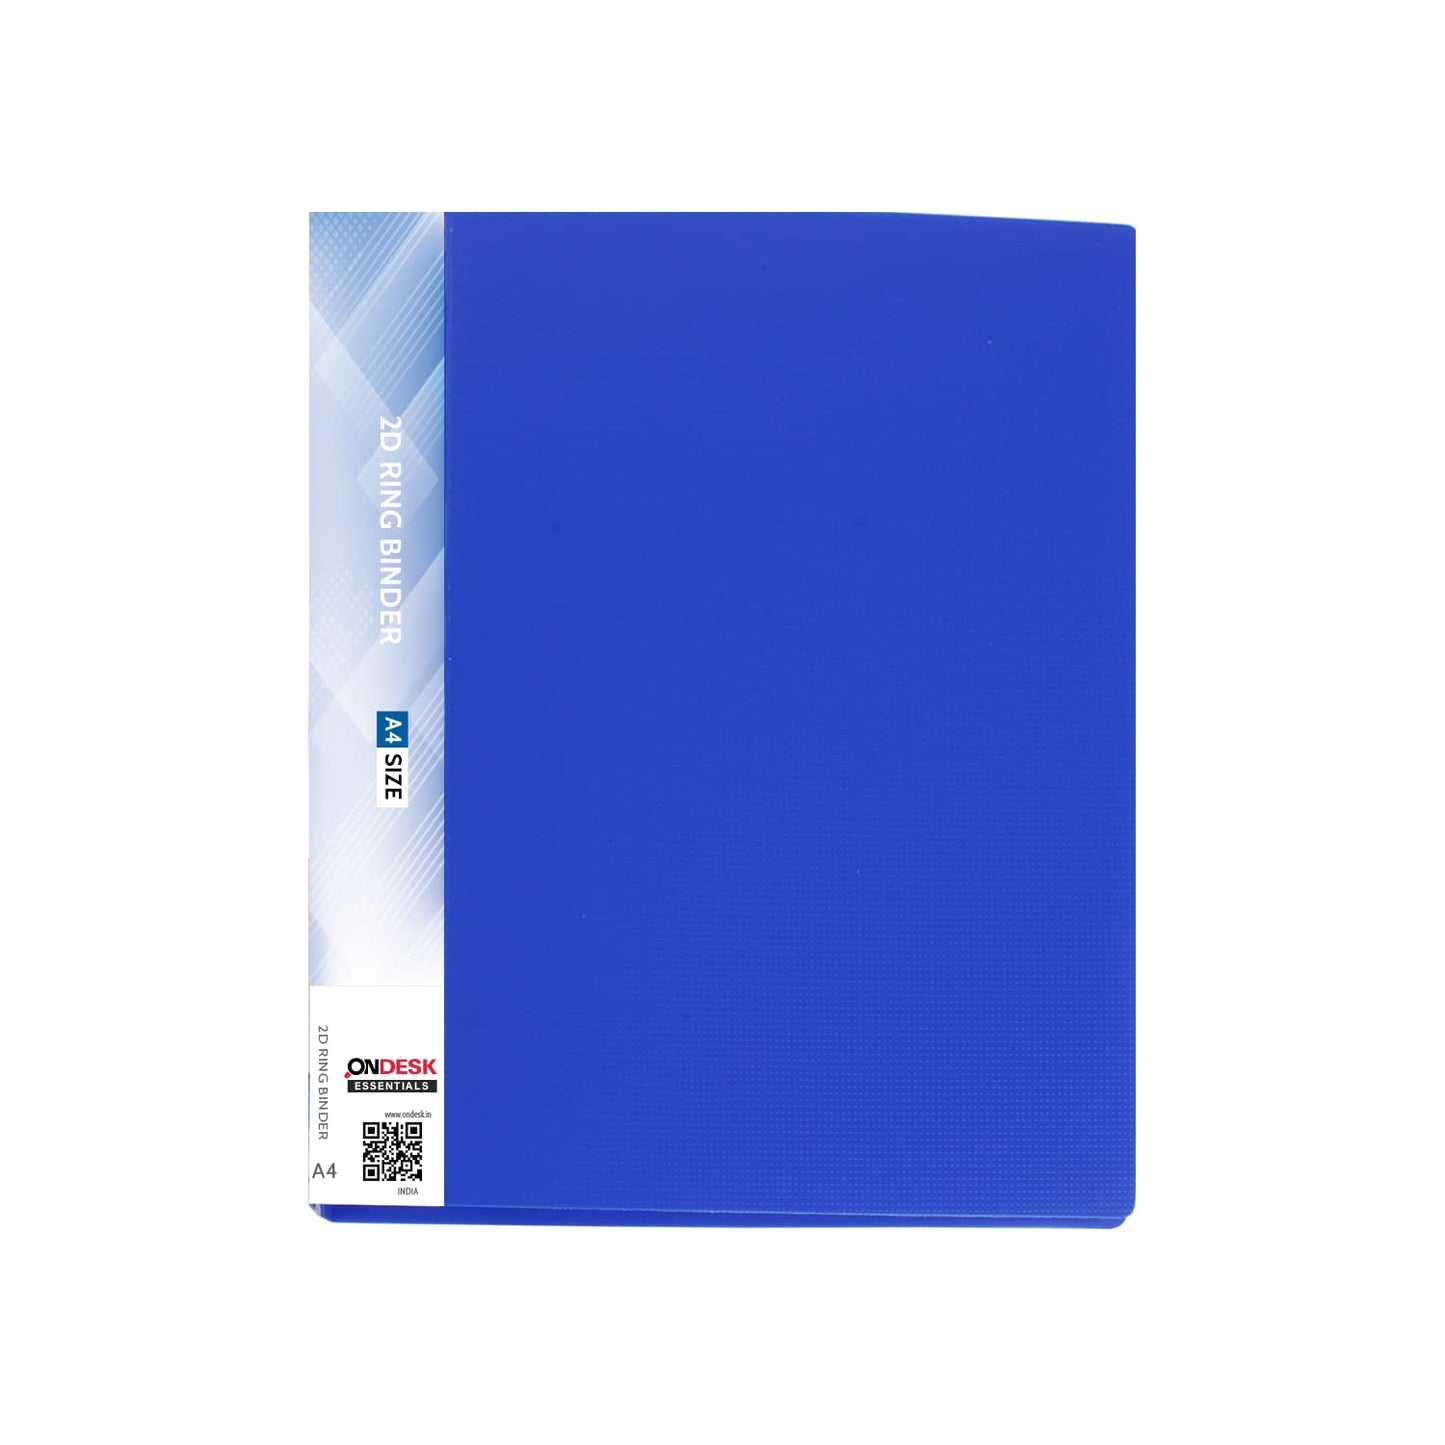 Ondesk Essentials 2D Ring Binder File | Durable Plastic Document File Folder | File For A4 Size Documents | Blue, Pack Of 1